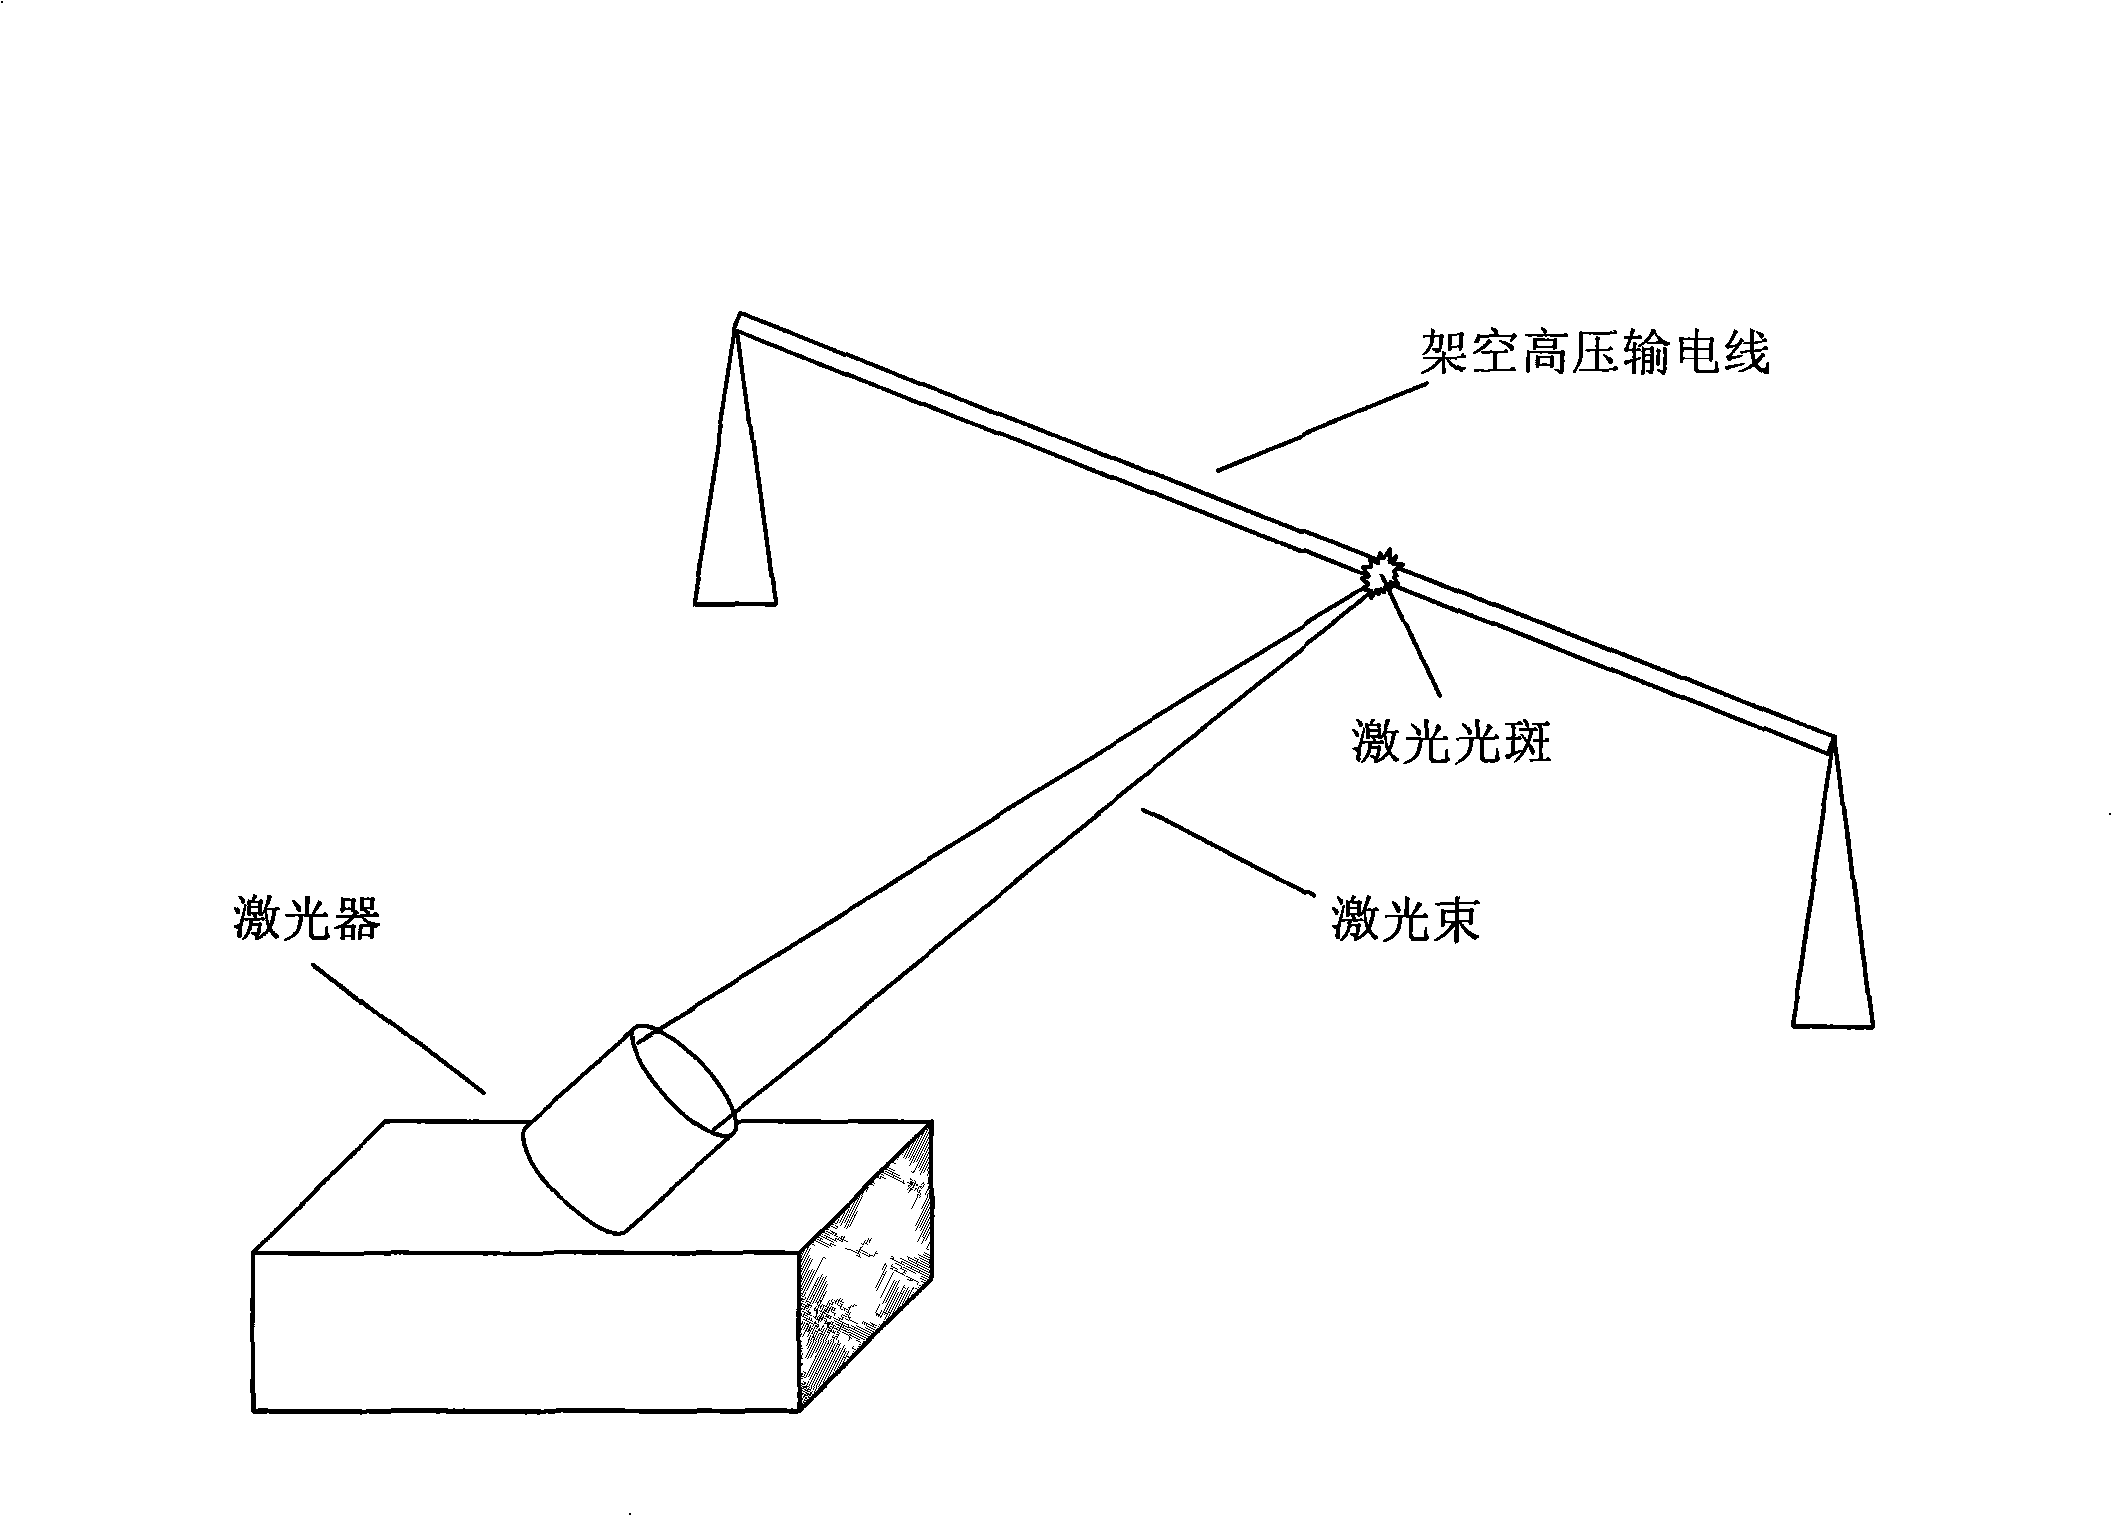 Method for deicing aerial high voltage power line using laser